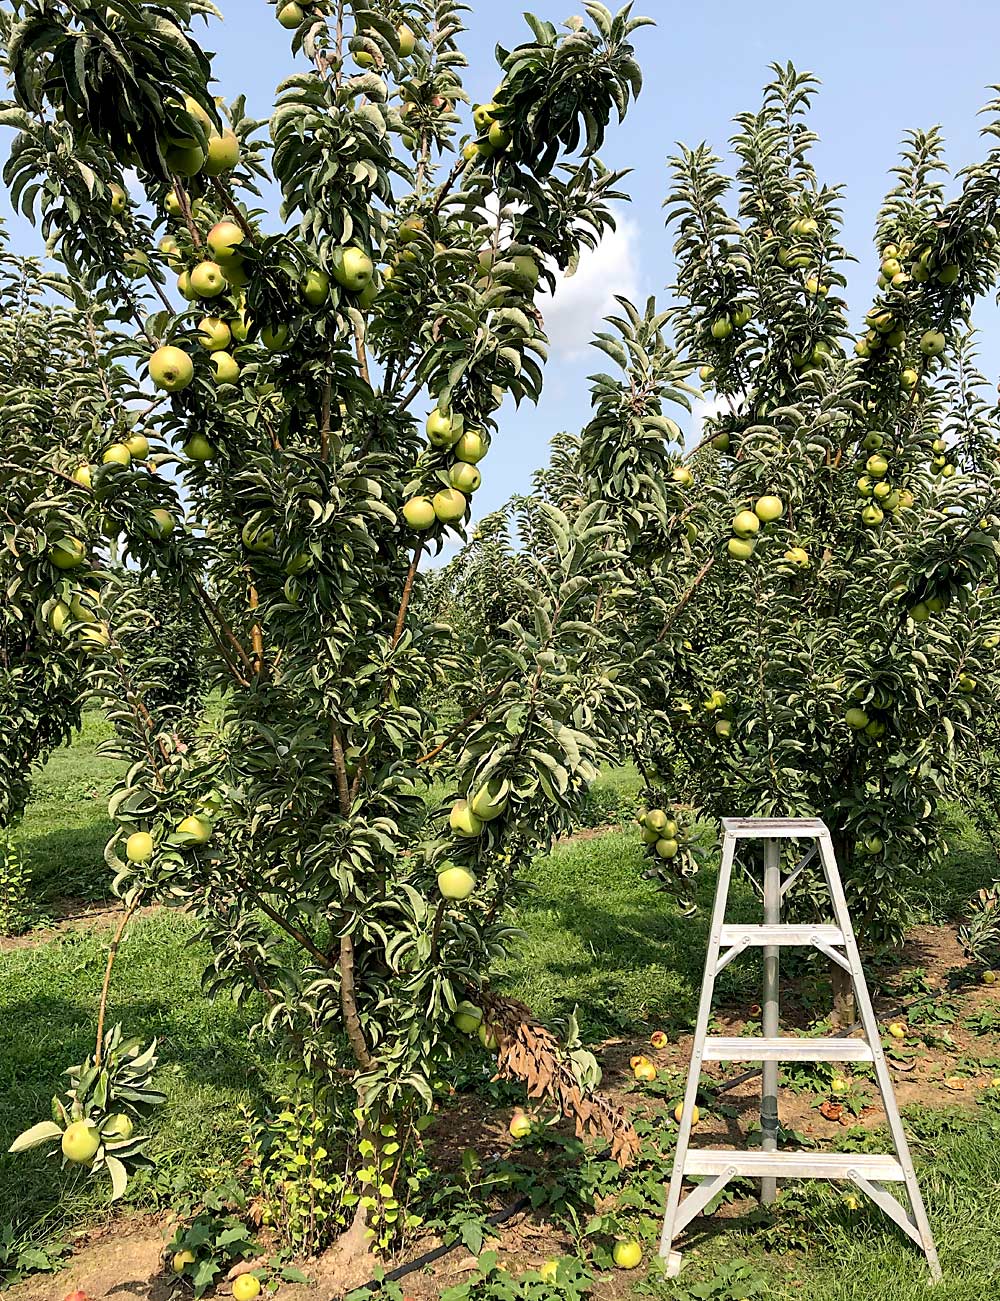 With parentage including Gala and McIntosh Wijcik, MD-TAP1 and its cousin, MD-TAP2, both have a strong upright growth habit, shown here in unpruned breeding program trees. Walsh said the varieties could reduce the labor demands for training and pruning, an advantage for the region’s many direct-market growers. (Courtesy Chris Walsh/University of Maryland)